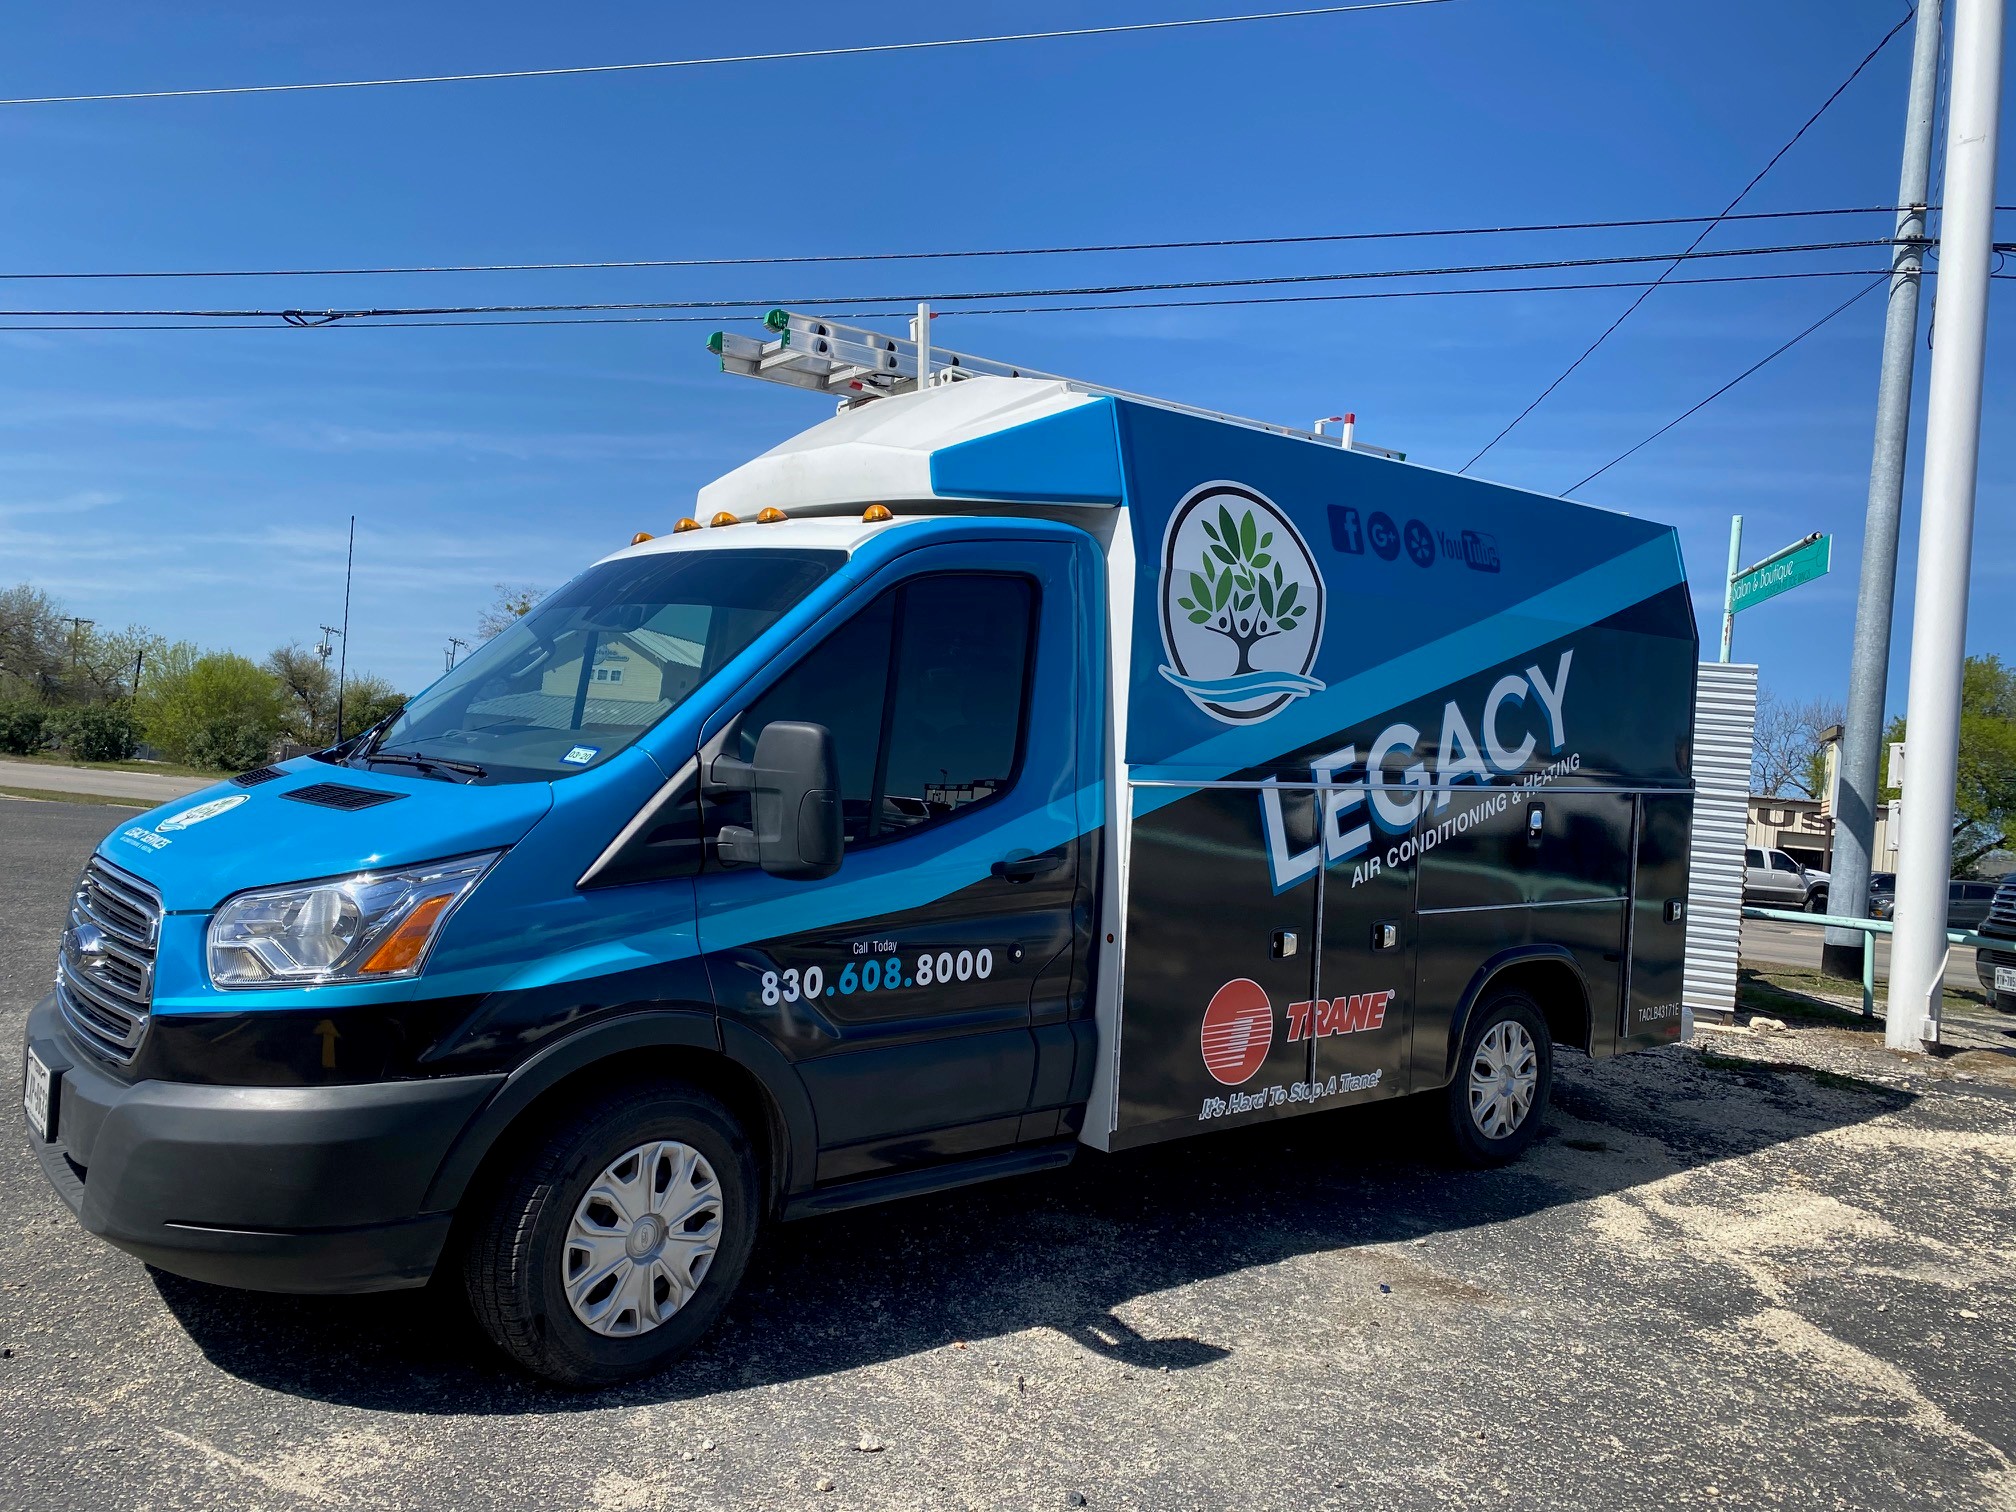 Legacy Home Services truck